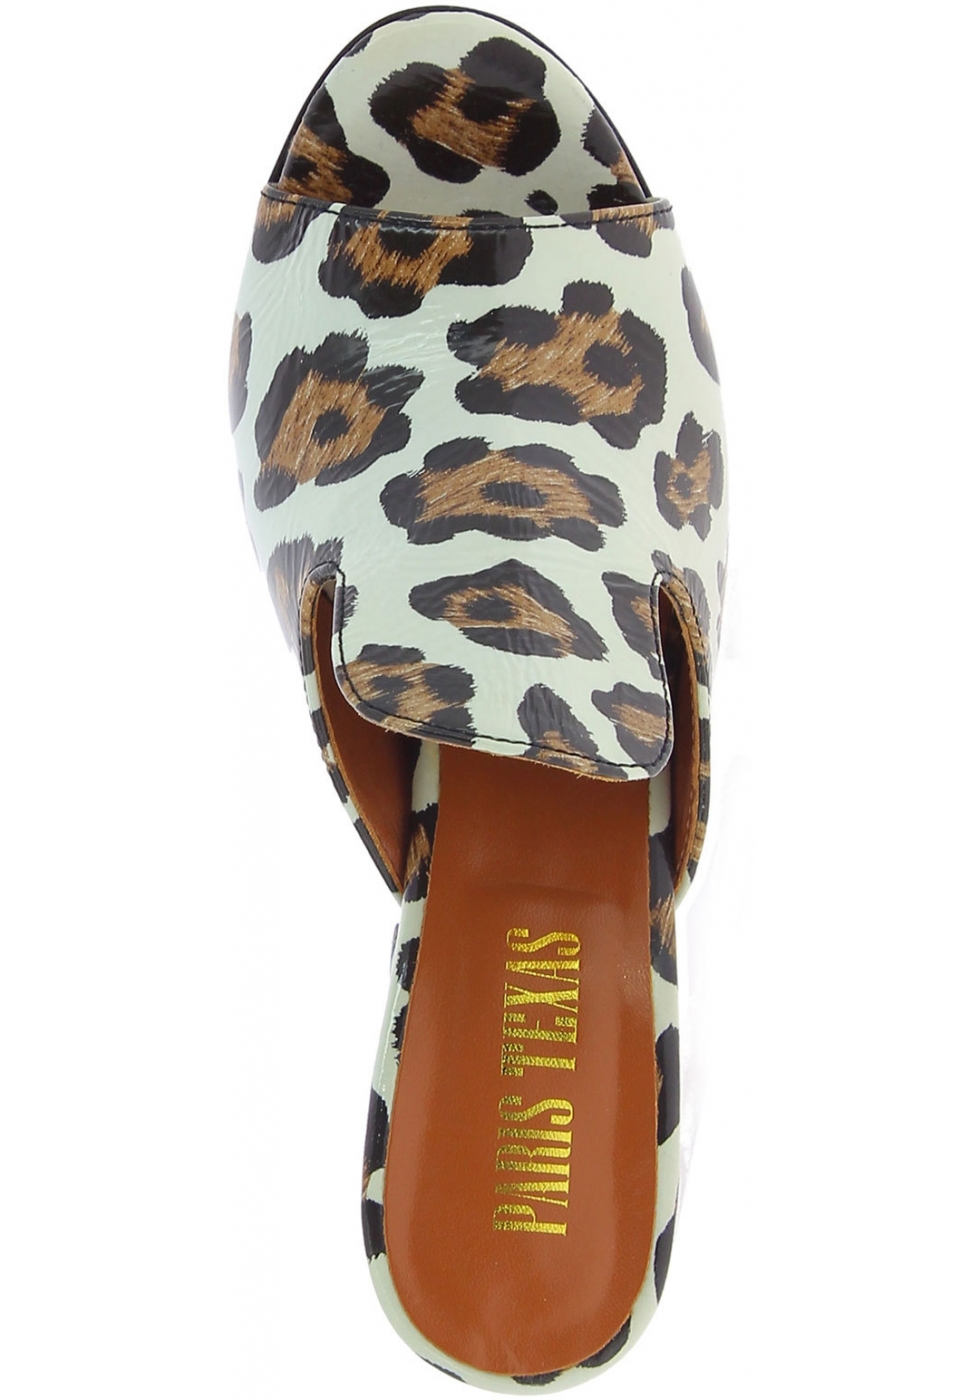 Paris Texas Women&#39;s fashion high heels mules leopard leather made in Italy - Italian Boutique